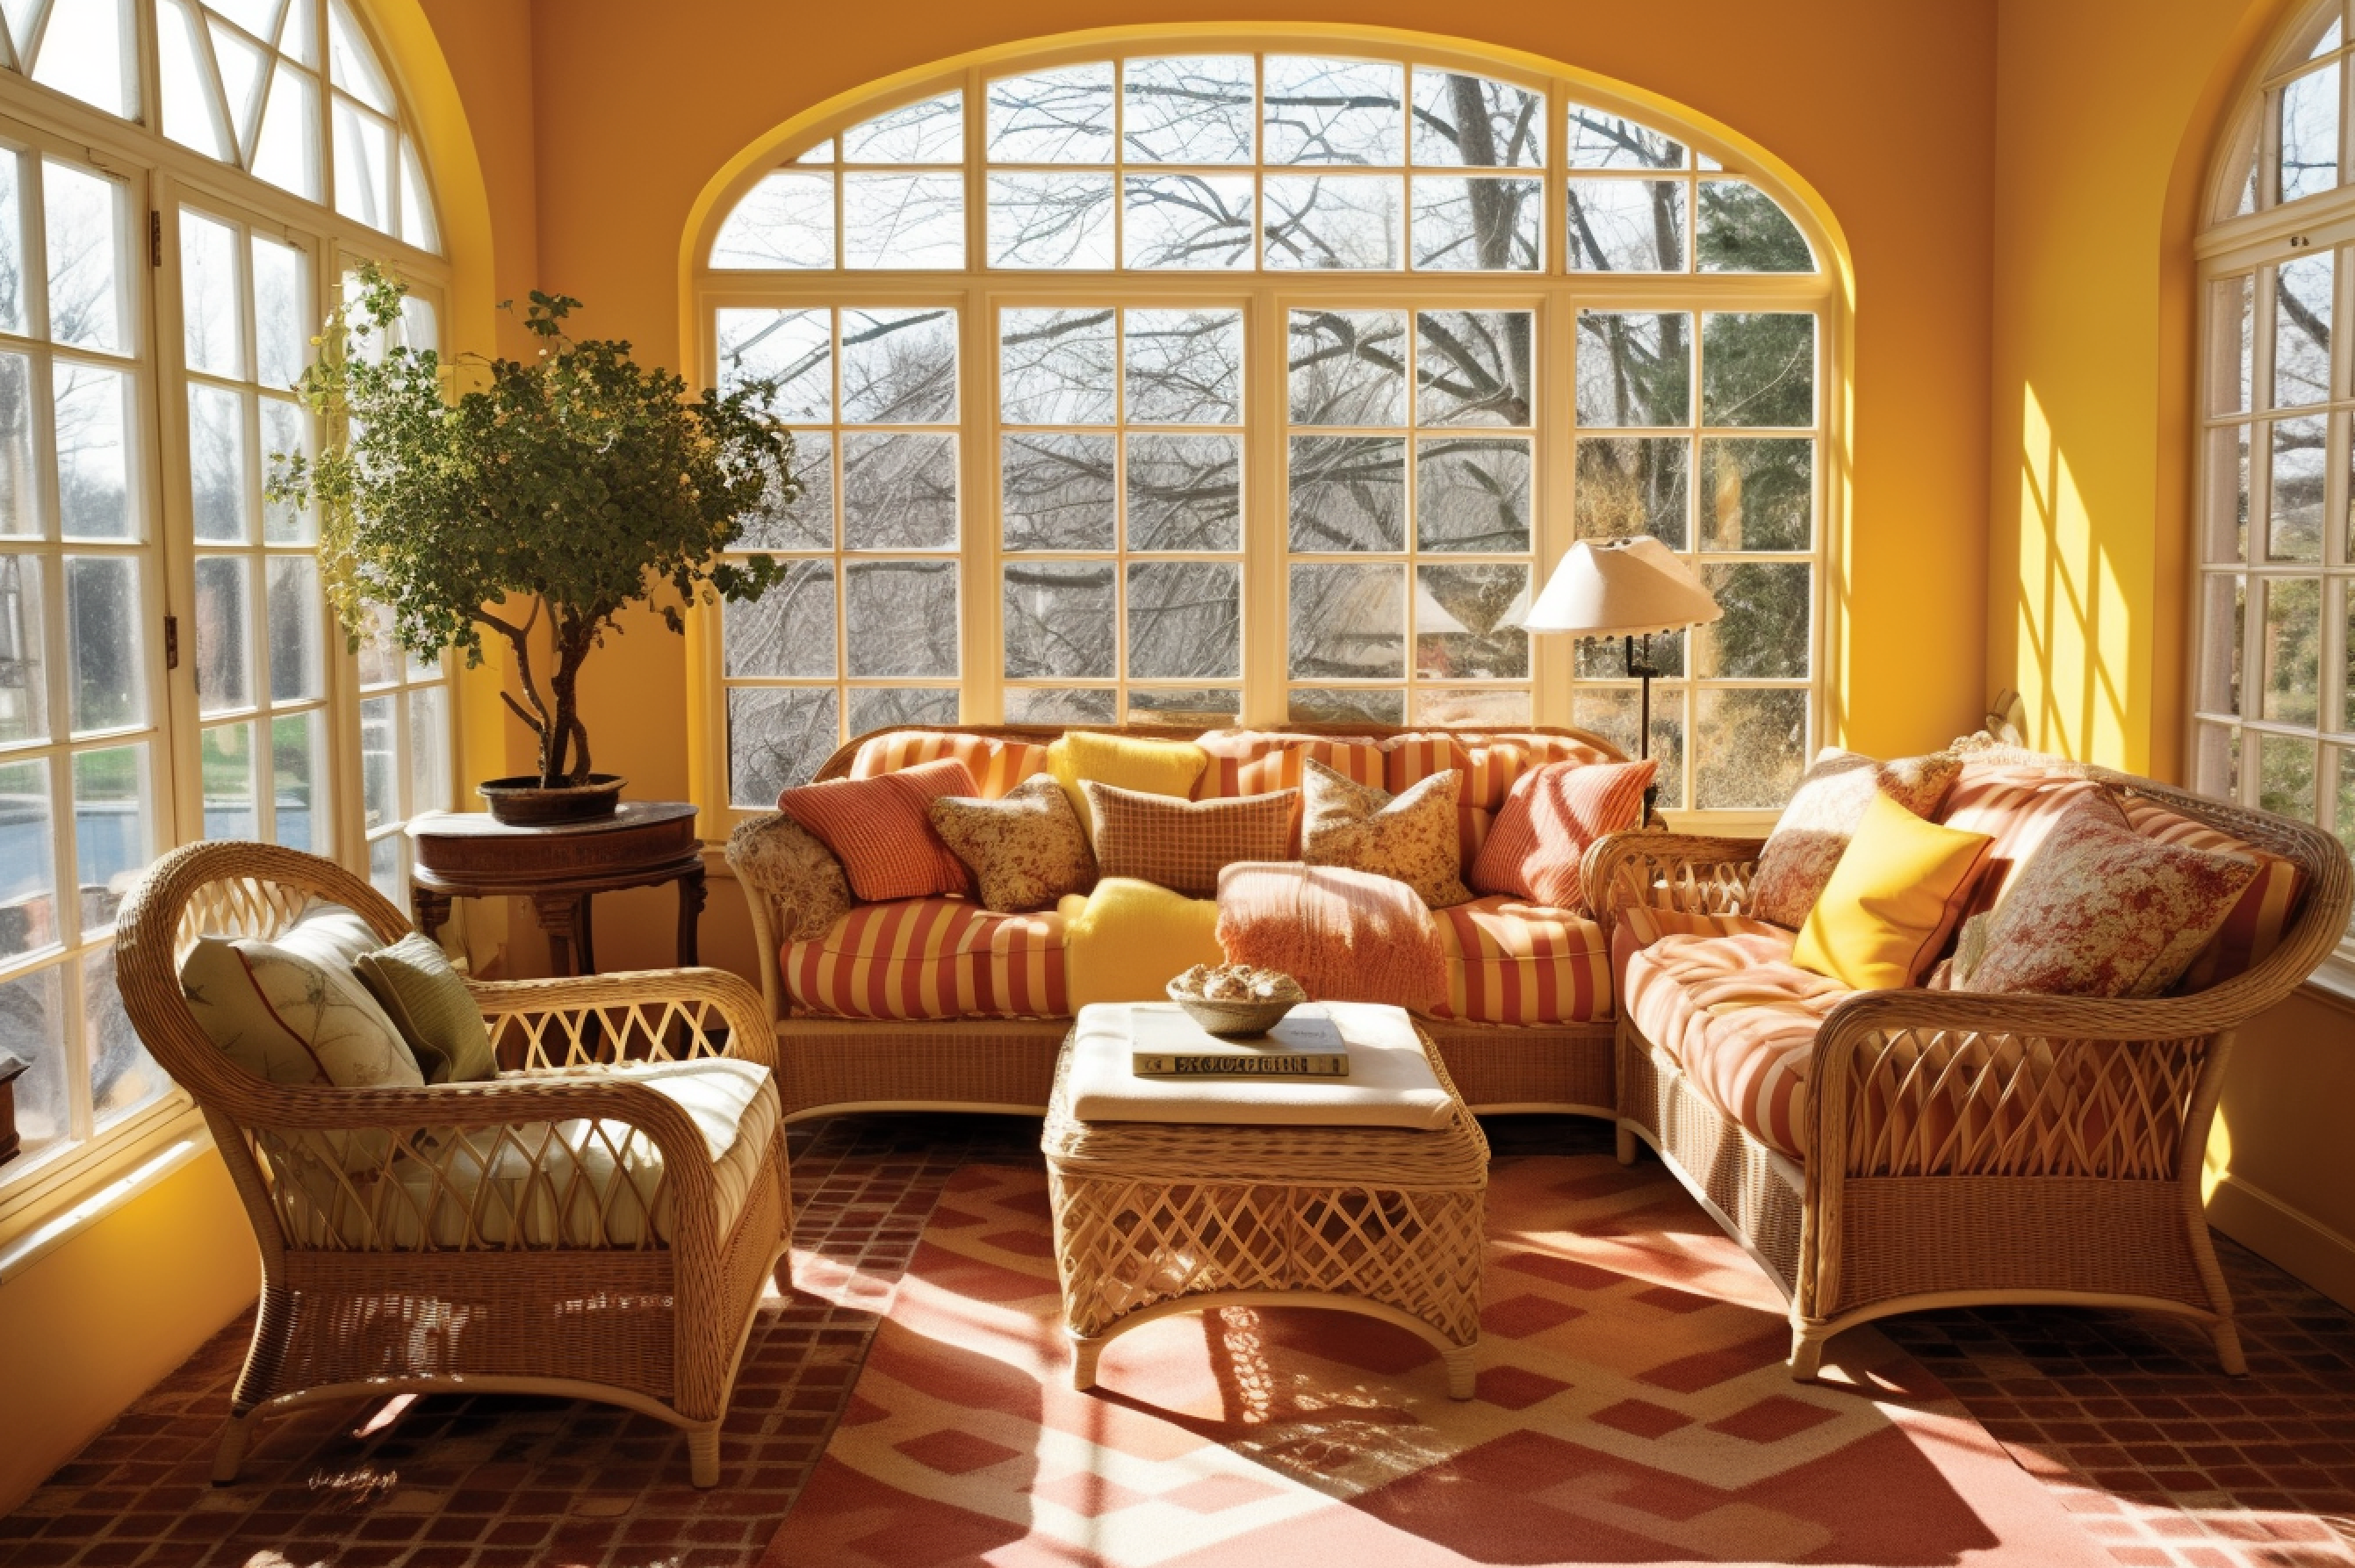 Picture of a bright sunroom with warm umber brown wicker furniture against sunflower yellow painted walls.